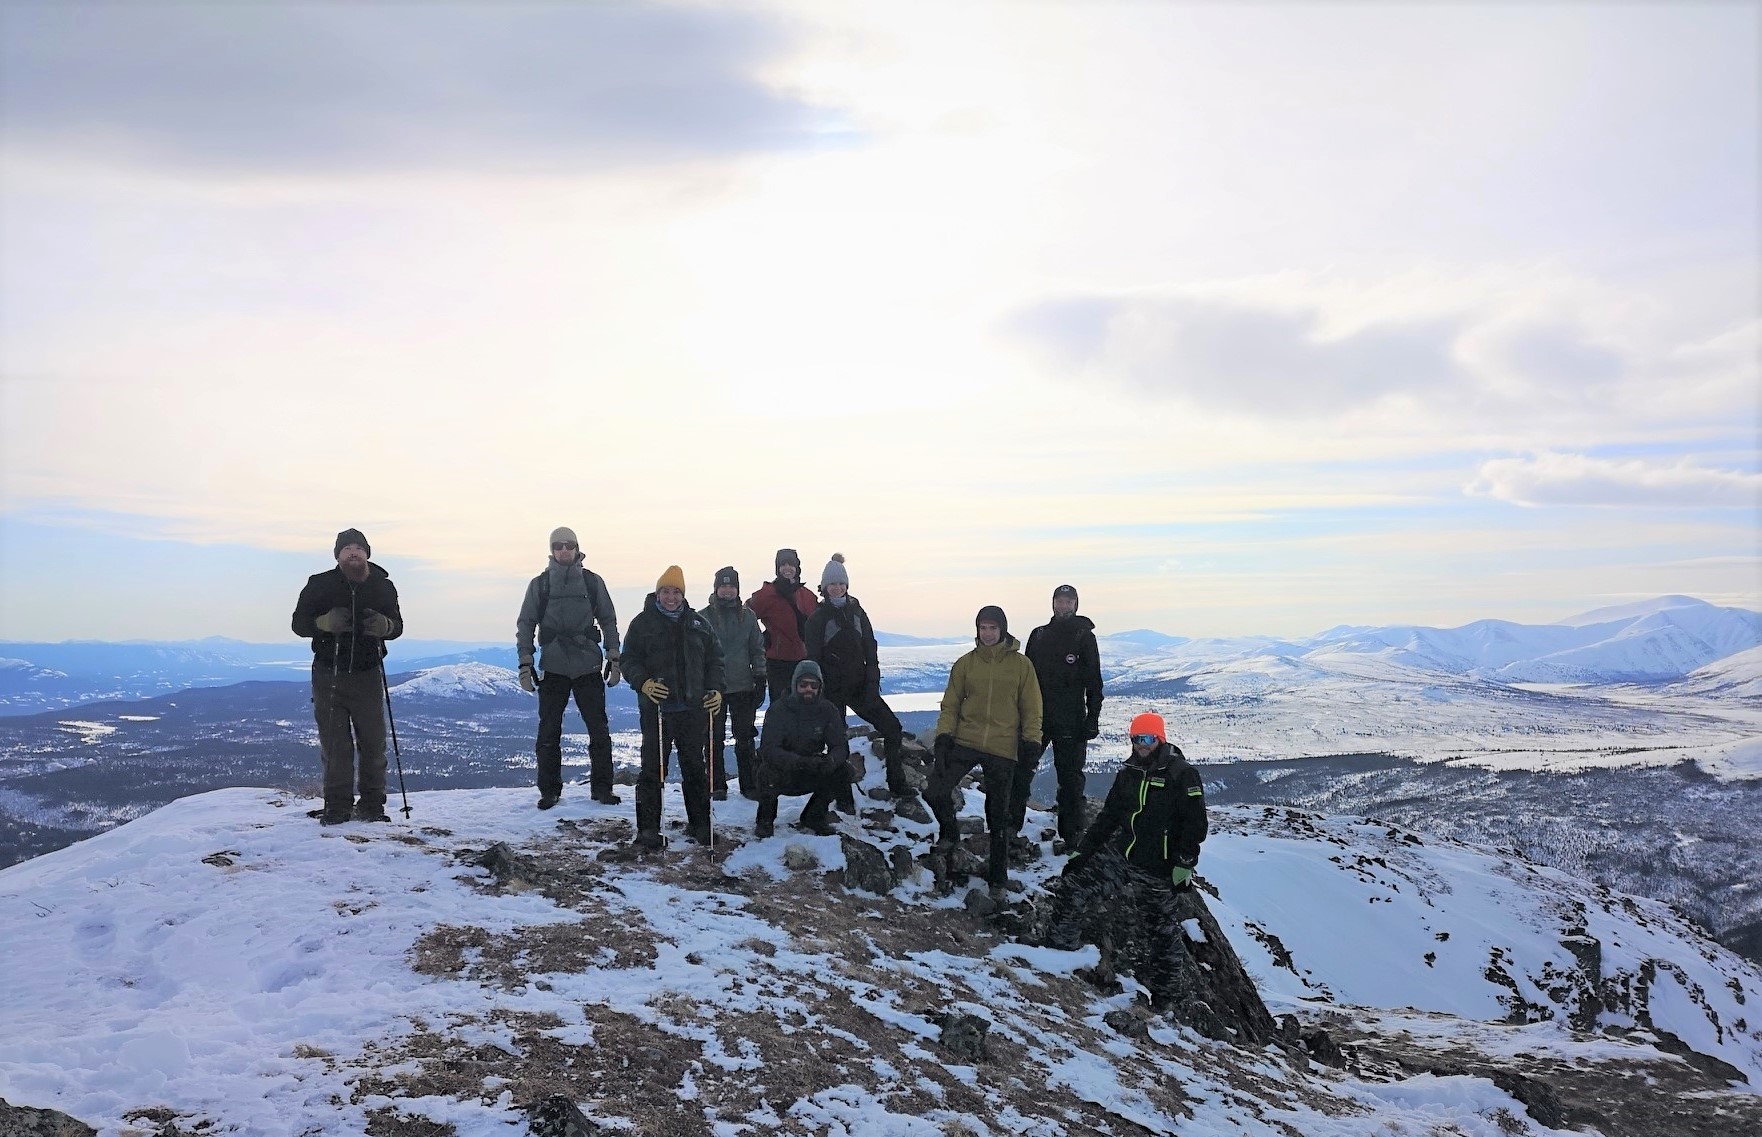 RRMT 201 Winter Travel and Survival hike out